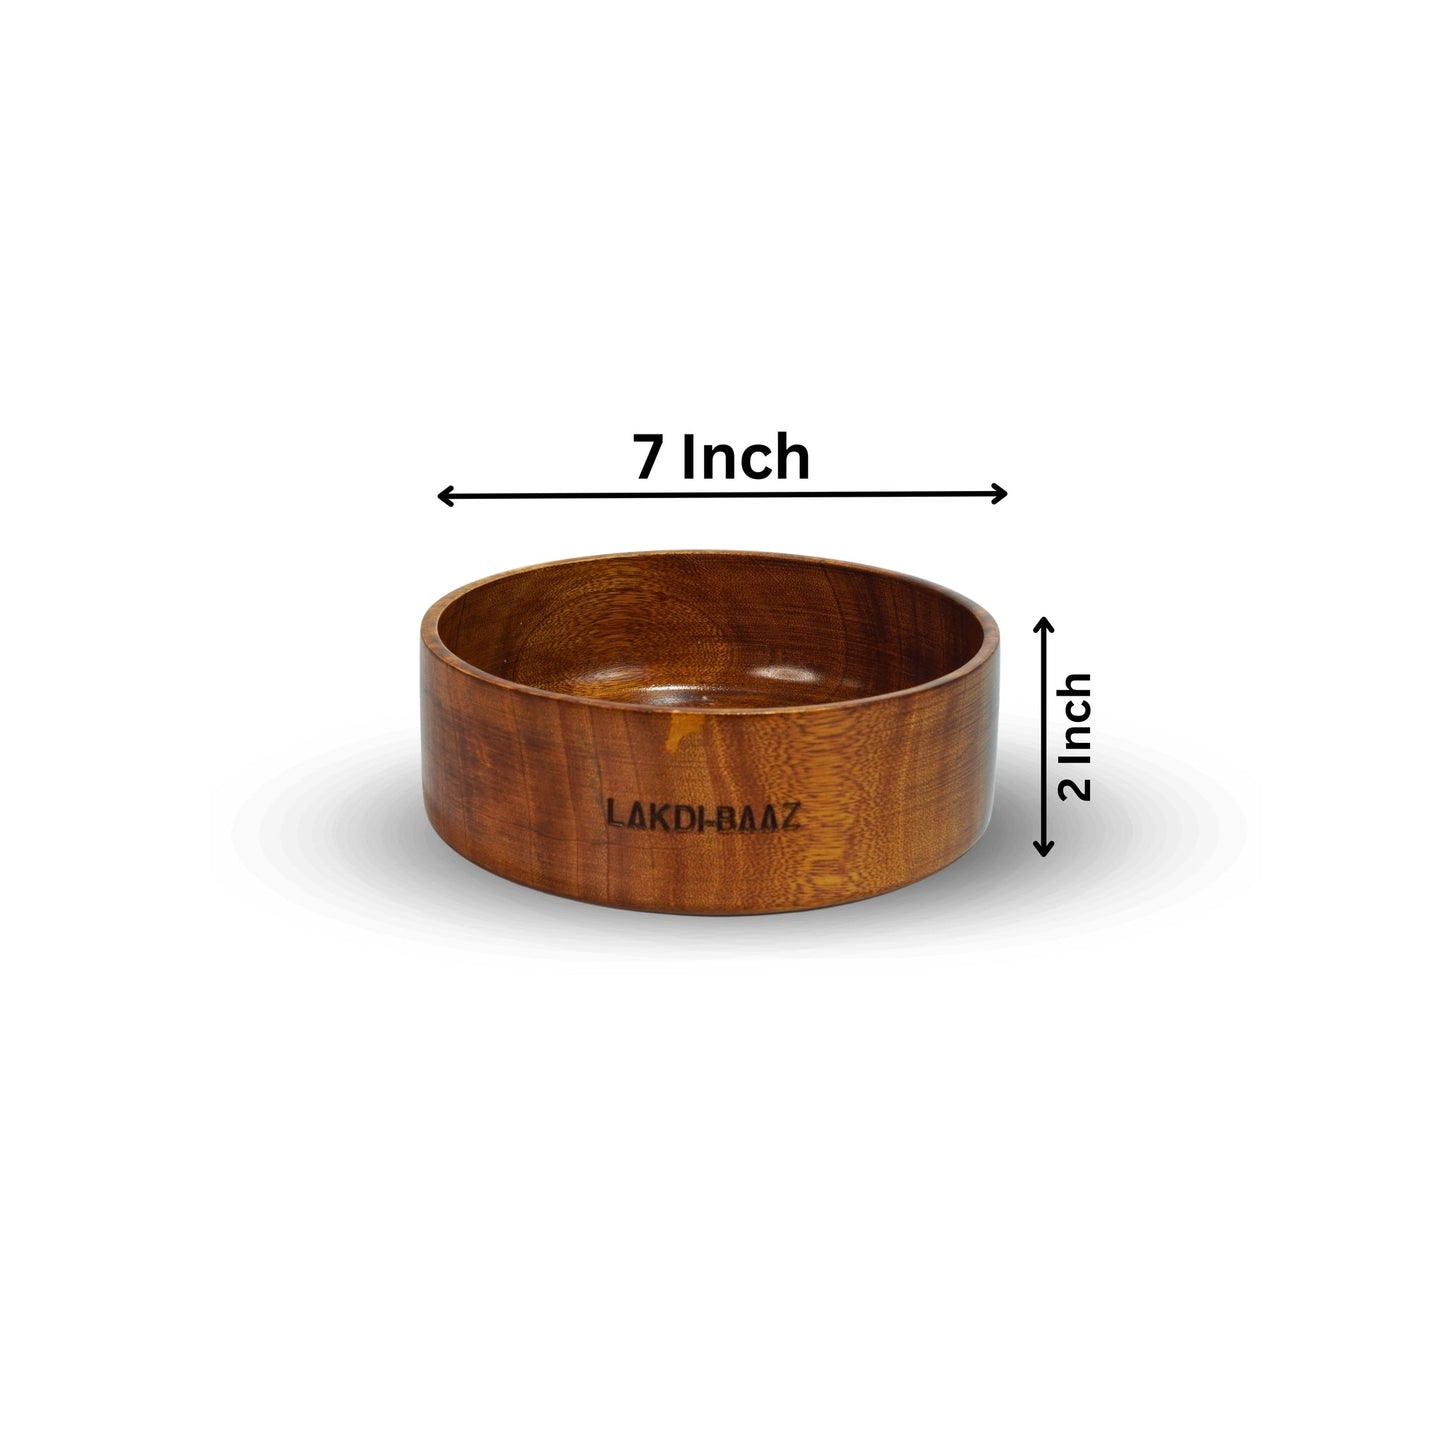 Buy Natural Non Toxic Wooden Bowl for Salad Made From Neem Wood No Color Used 750 ml 7Inch/17.5cm Teak